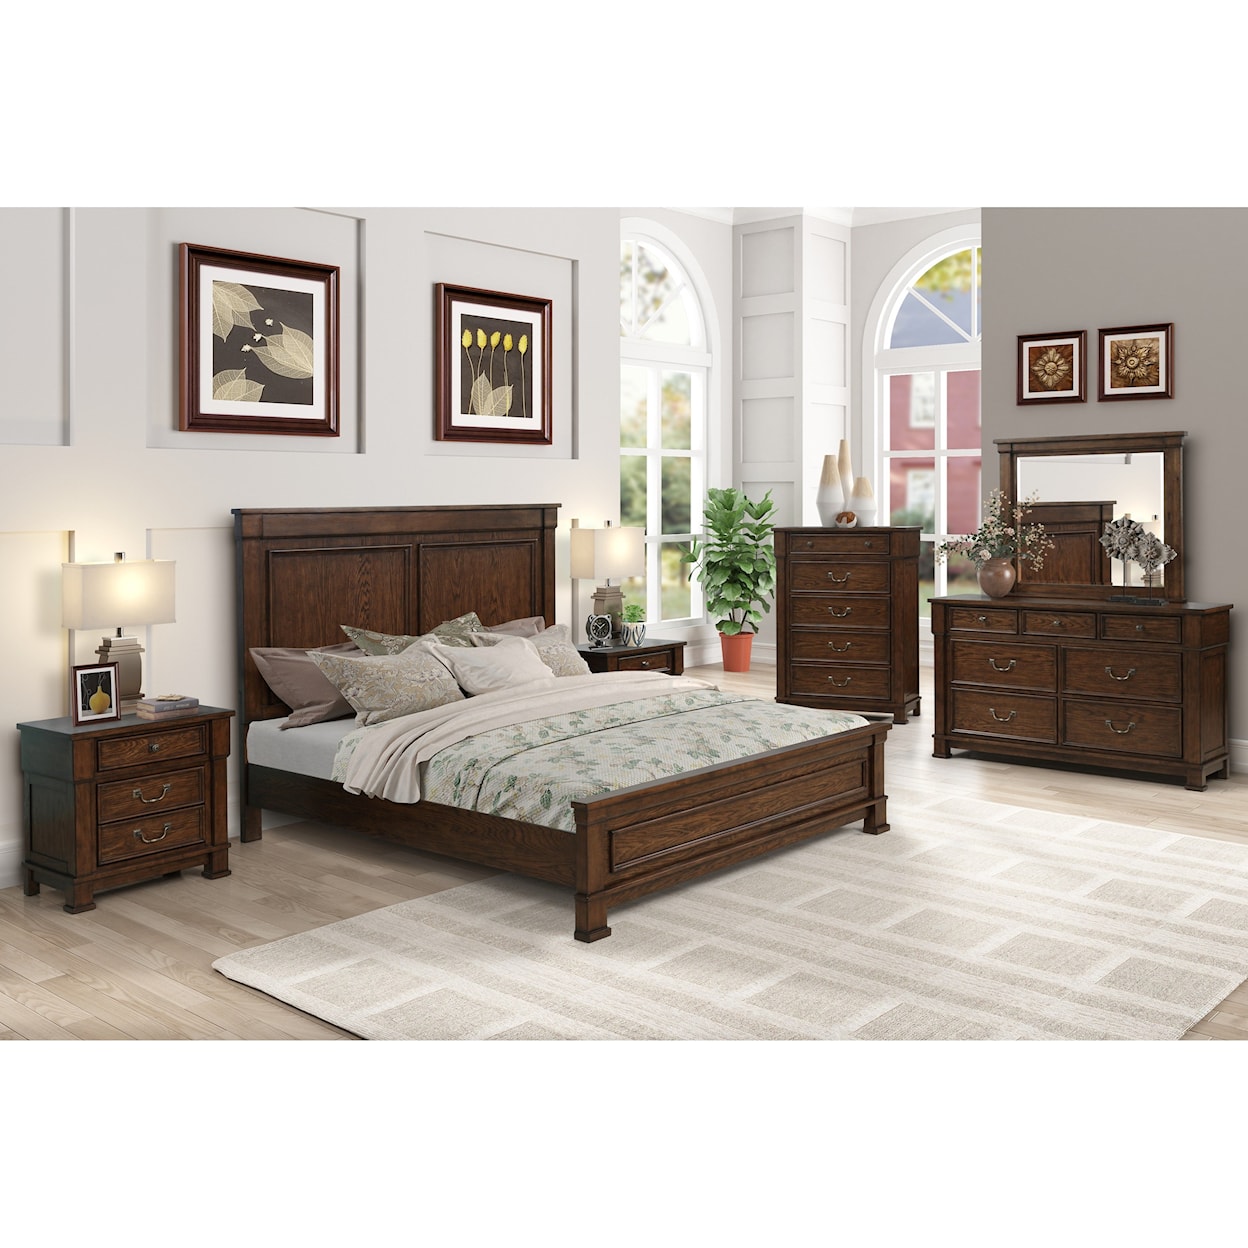 New Classic Providence Queen Bedroom Group 